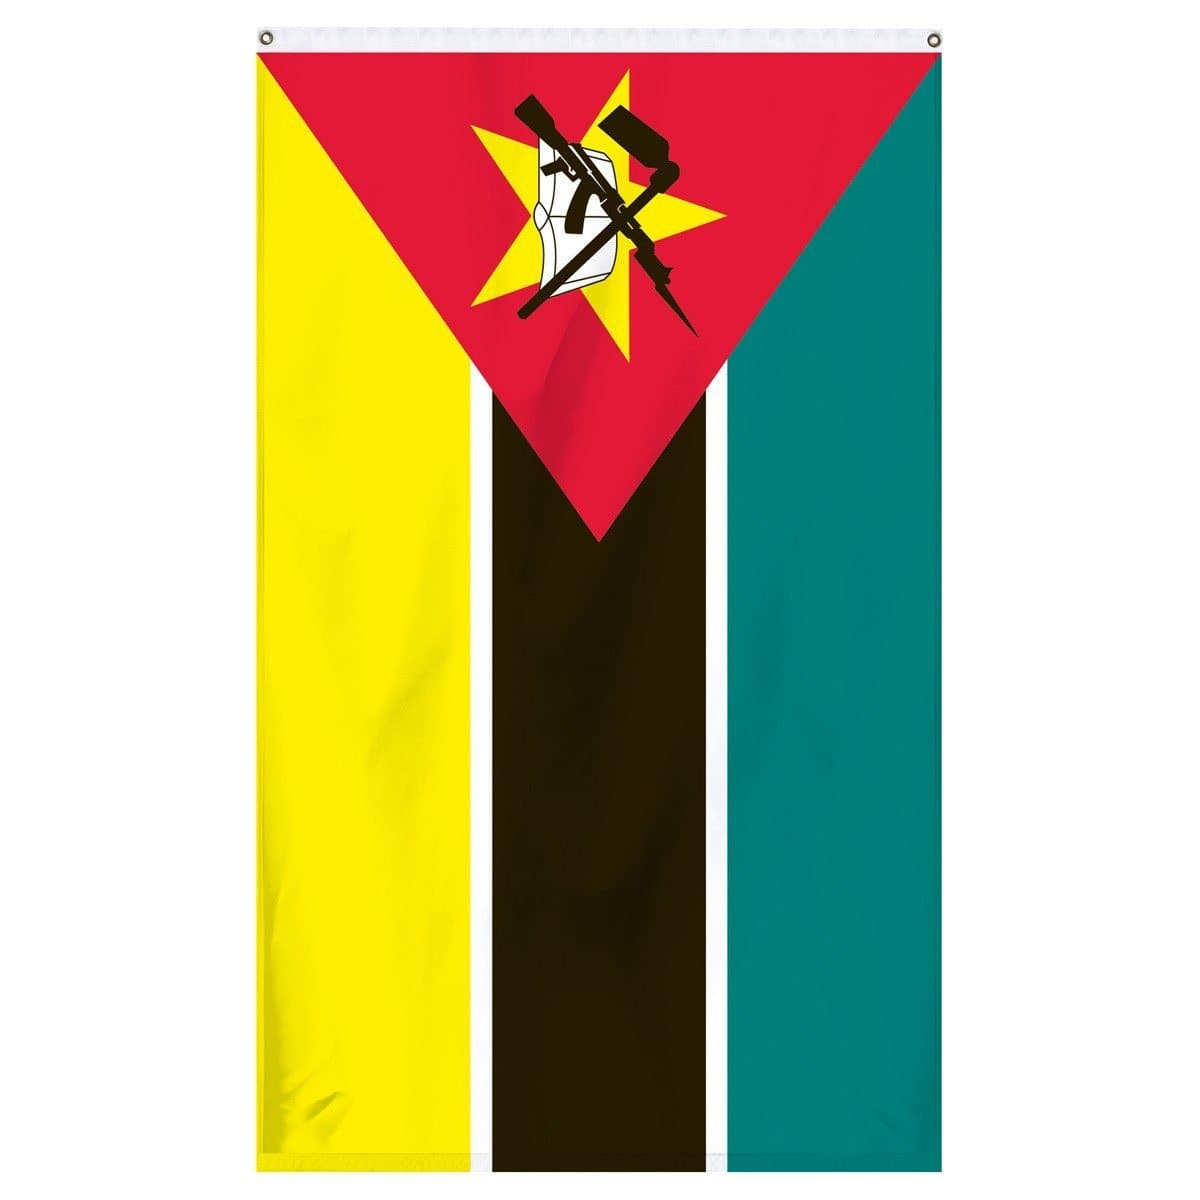 Mozambique national flag for sale online to buy from Atlantic Flagpole, an American company selling American made flags and poles.